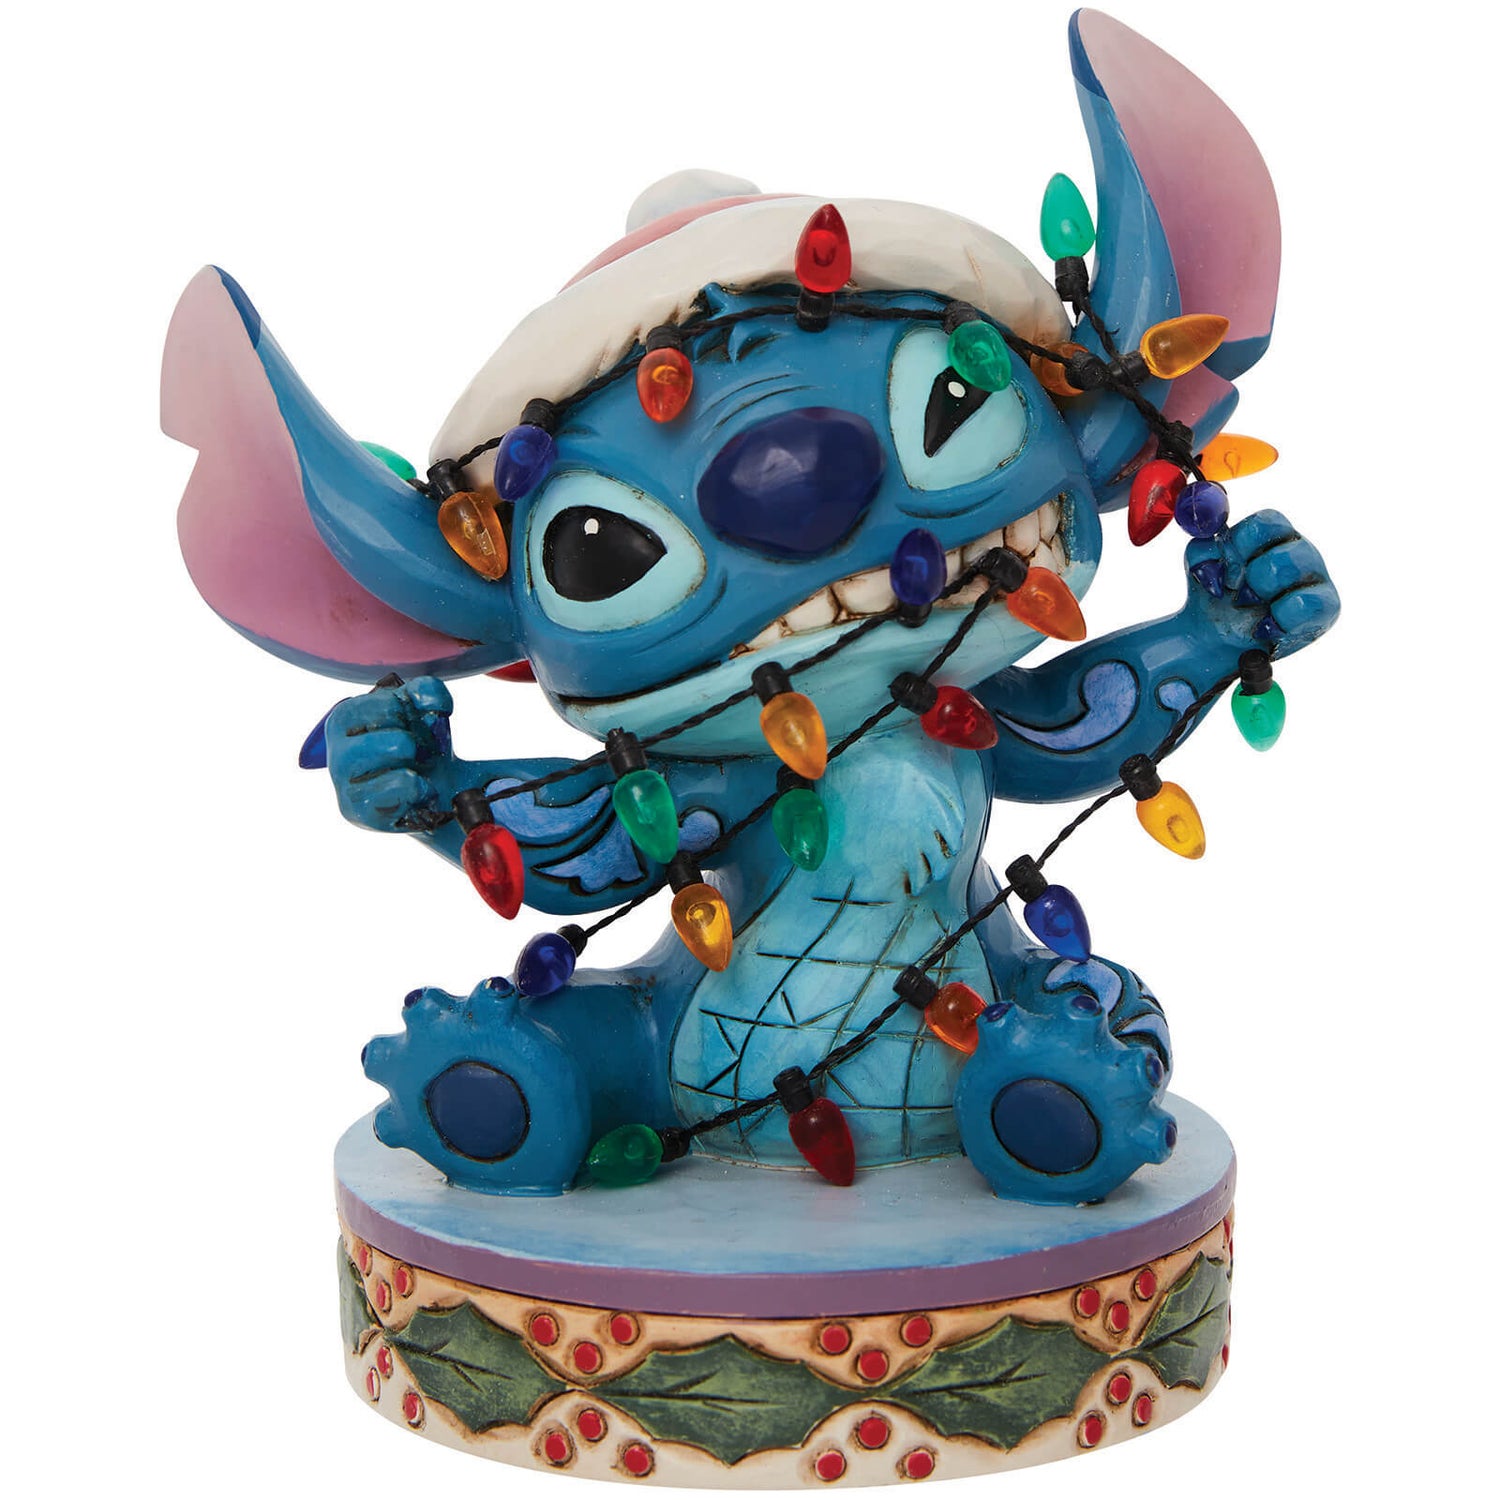 Disney Traditions Stitch Wrapped in Lights Figurine